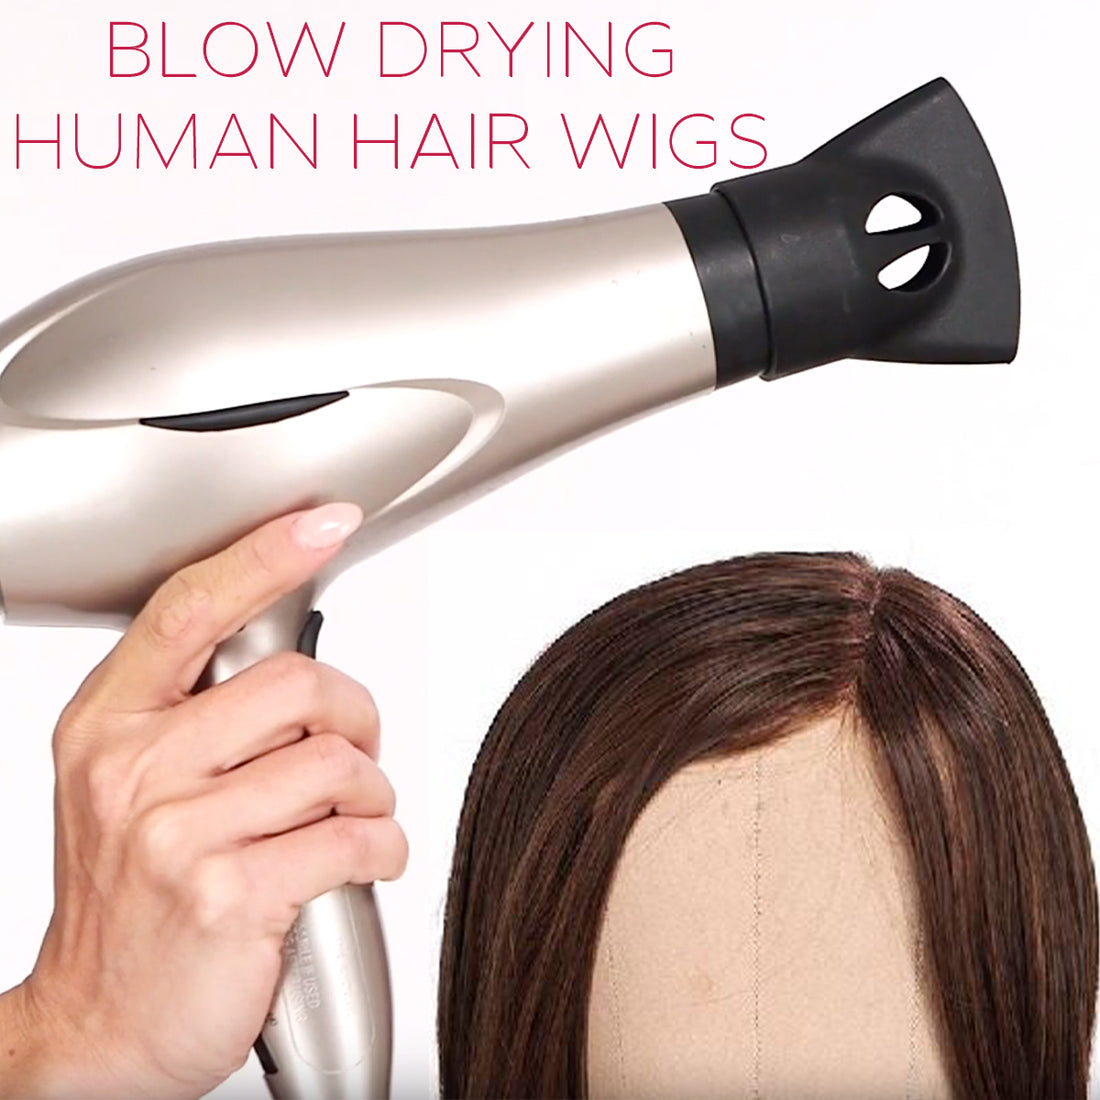 Why Our Wig Experts Recommend Blow Drying Human Hair Wigs